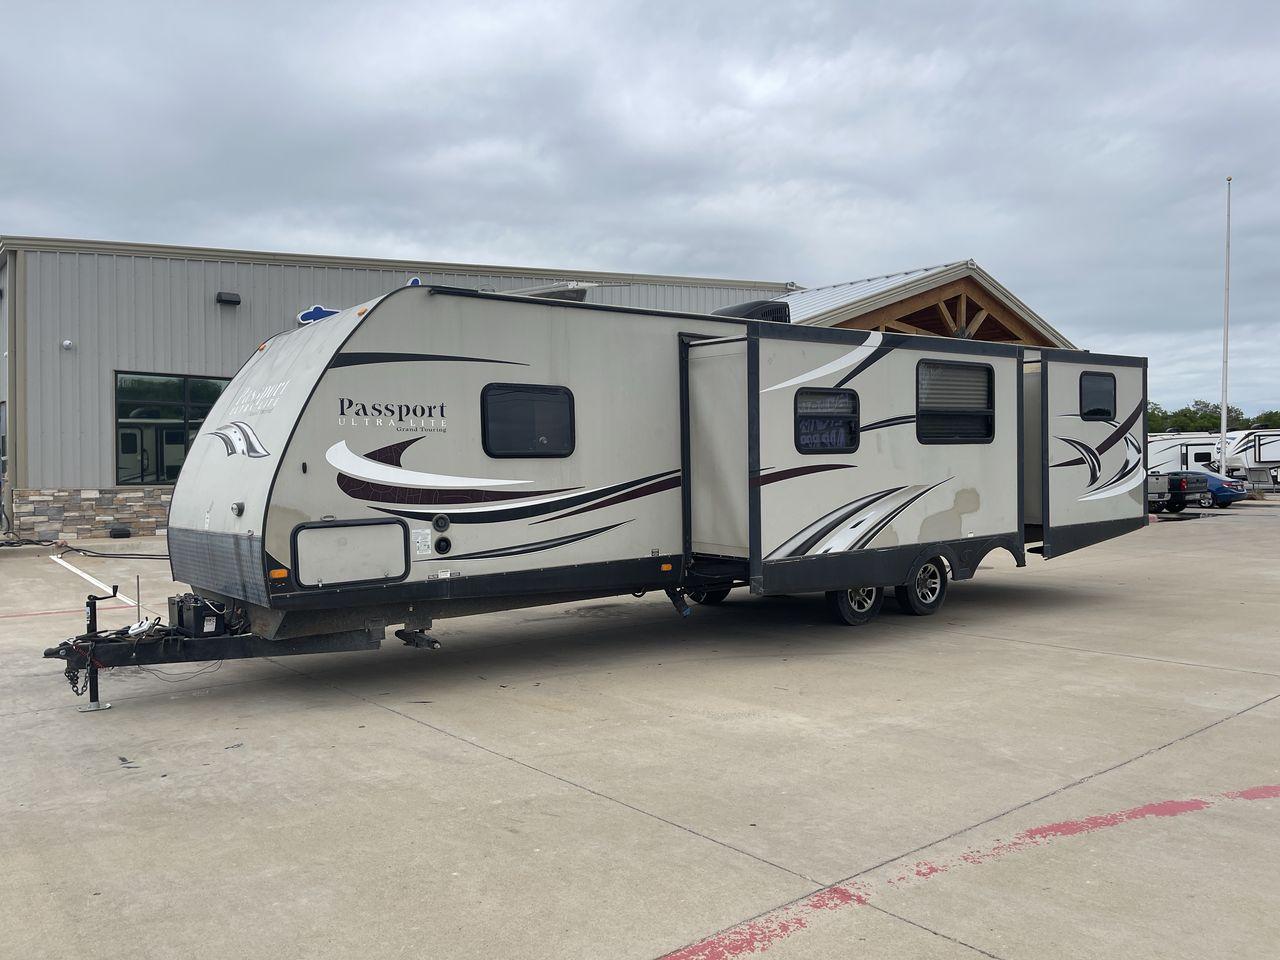 2015 WHITE KEYSTONE PASSPORT 3320 BH - (4YDT33229FT) , Length: 36.83 ft. | Dry Weight: 6,590 lbs. | Gross Weight: 8,000 lbs. | Slides: 3 transmission, located at 4319 N Main Street, Cleburne, TX, 76033, (817) 221-0660, 32.435829, -97.384178 - With the 2015 Keystone Passport 3320BH travel trailer, you can easily bring friends along for a fun camping adventure. This unit measures 36.83 ft. in length and 10.92 ft. in height. It has a dry weight of 6,590 lbs. with a payload capacity of 1,410 lbs. The GVWR is about 8,000 lbs, and the hitch we - Photo #48